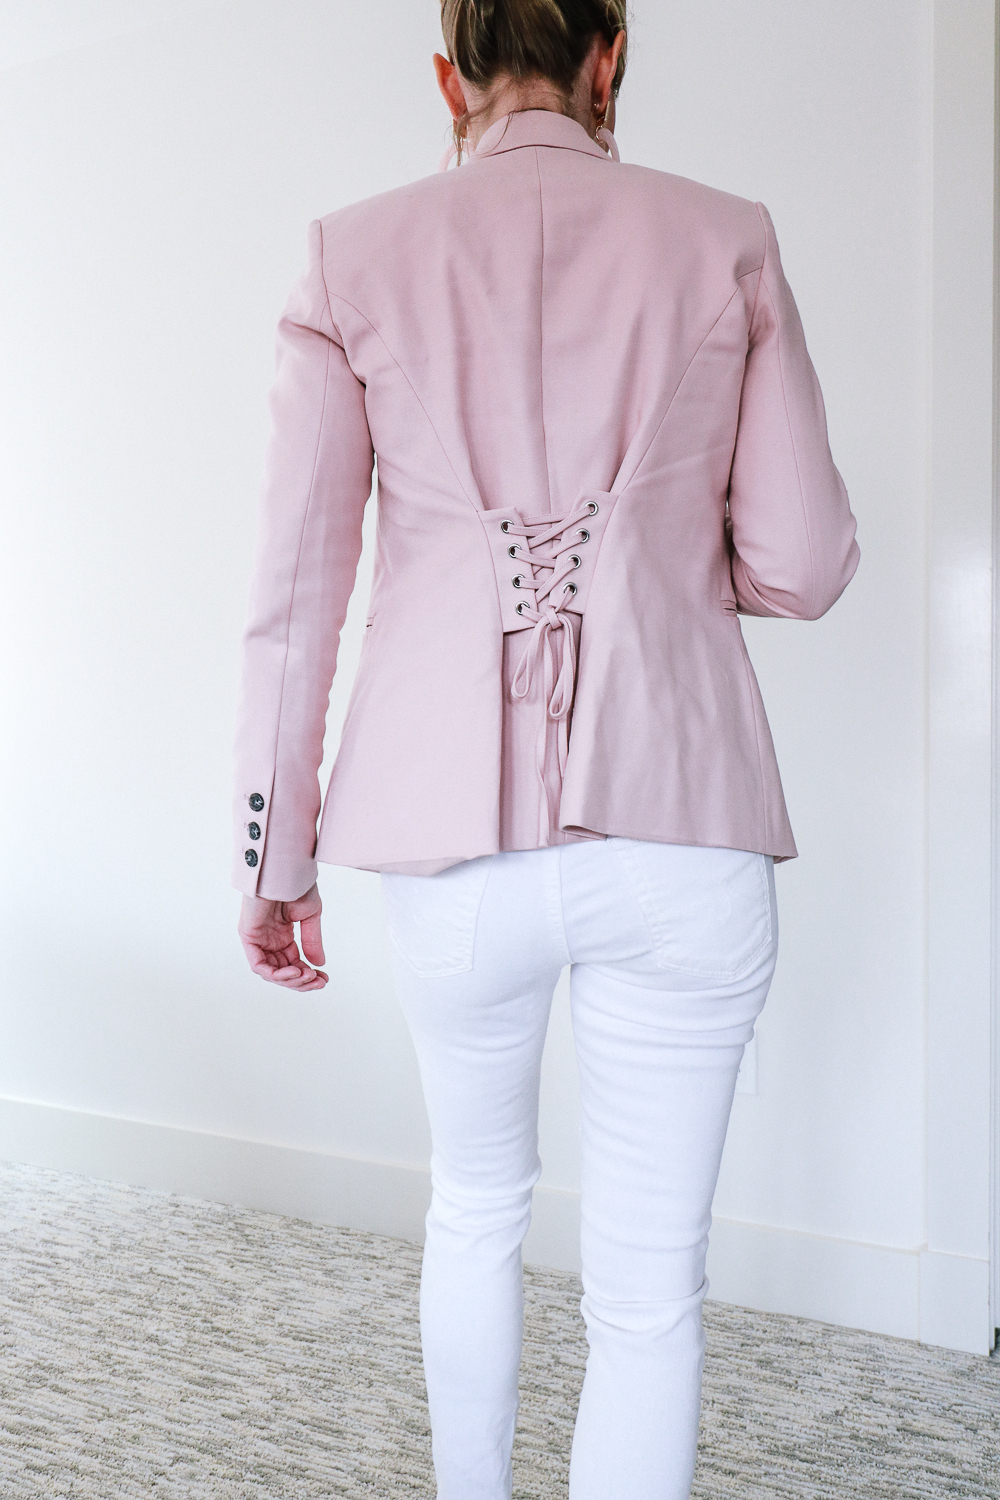 how to style your blazer, outfit ideas with your blazer, featuring a Vince Camuto pink blazer with corset detail on fashion blogger over 40, Erin Busbee of BusbeeStyle.com